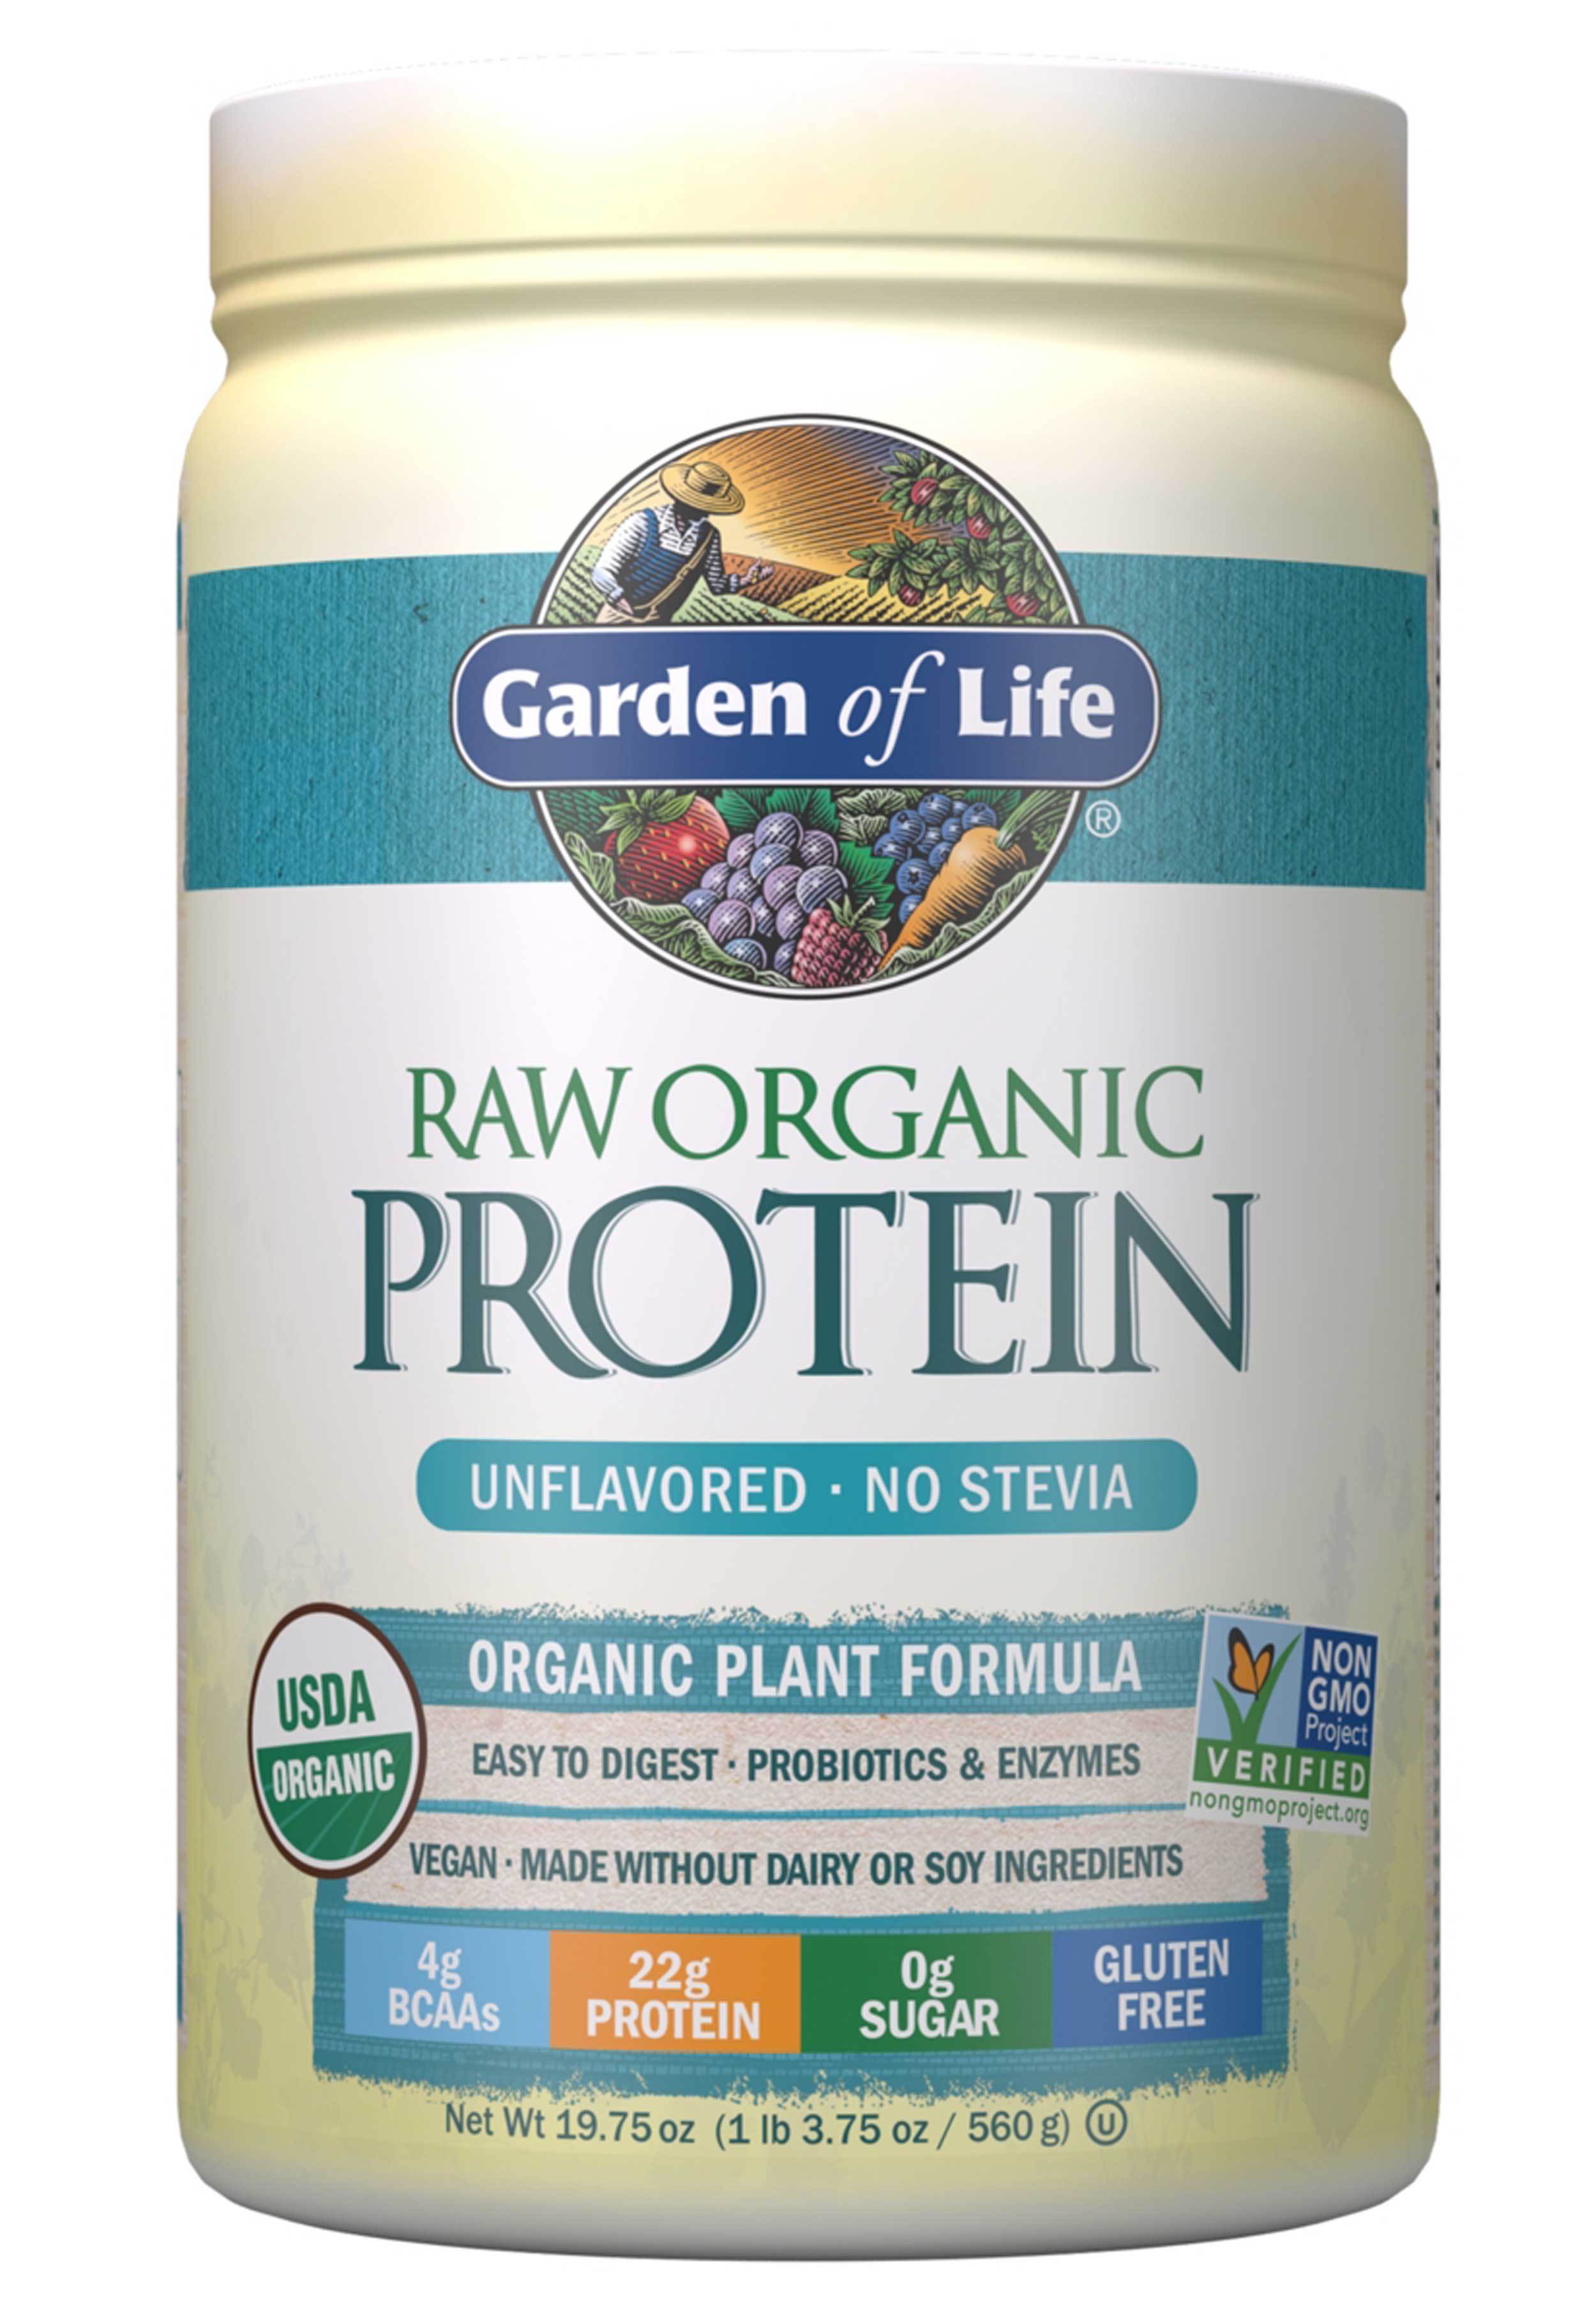 Garden of Life Raw Organic Protein Unflavored, No Stevia